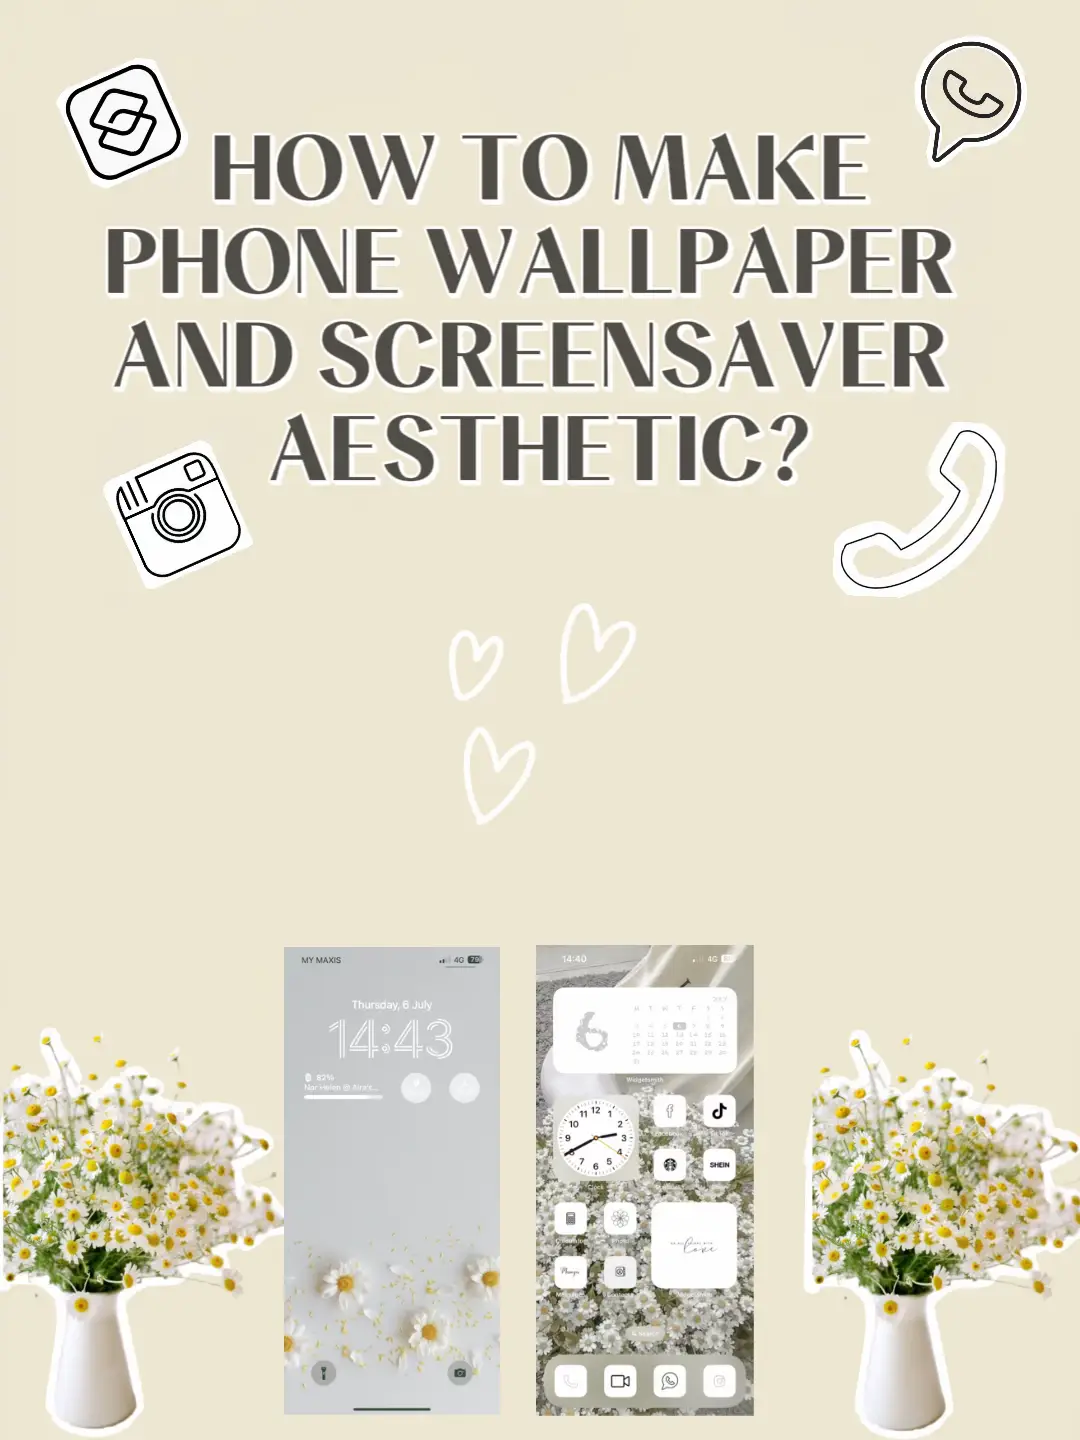 Cute Aesthetic Wallpaper set up, Gallery posted by Rosesna_